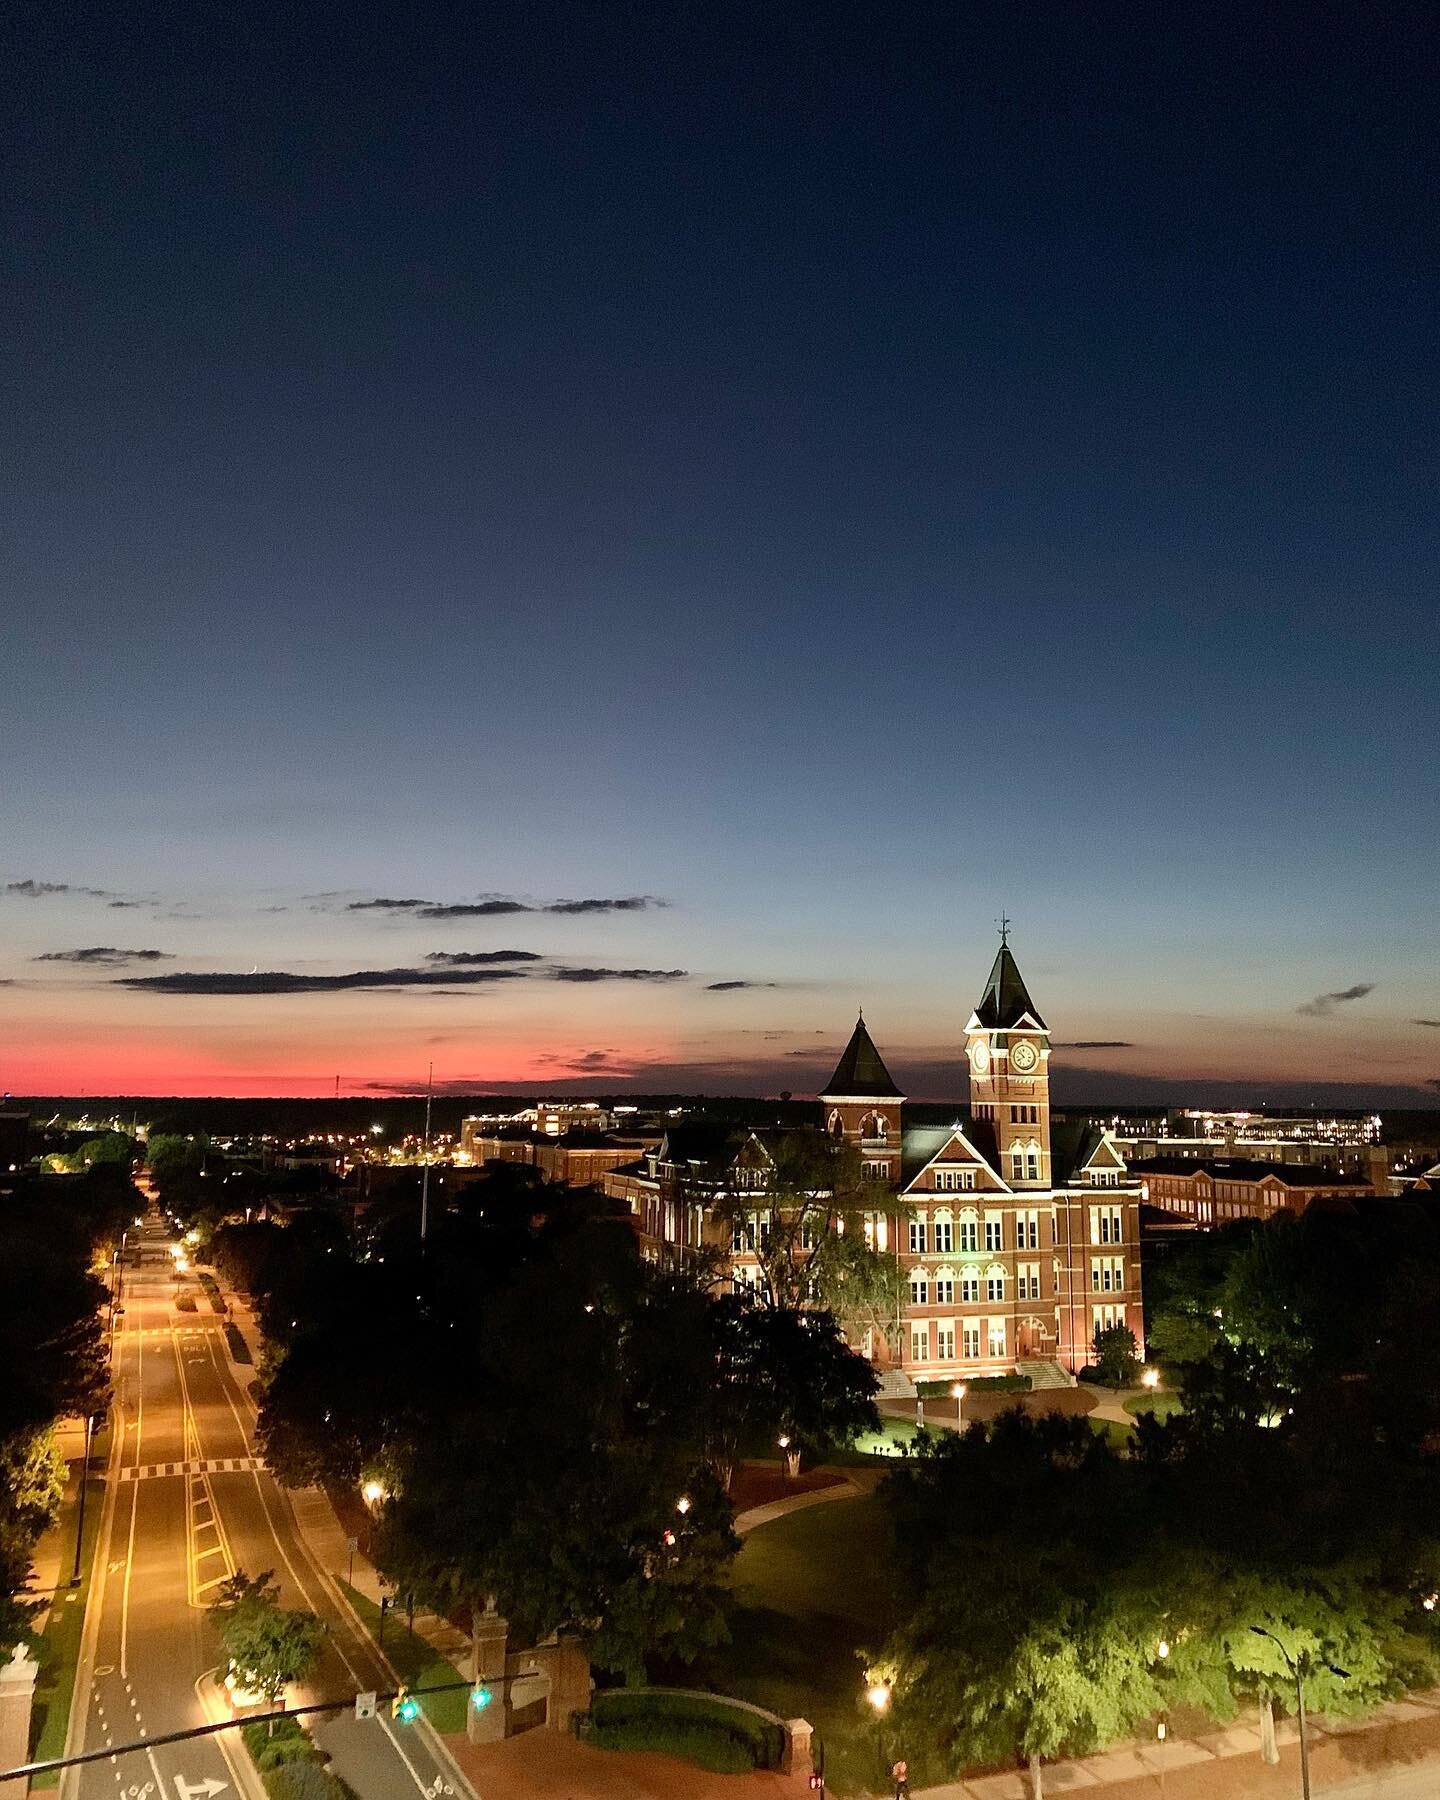 The view from the rooftop of the Tony and Libby Rane Culinary Sciences at Auburn University is amazing. #auburnuniversity #auburn #sunset #tourism